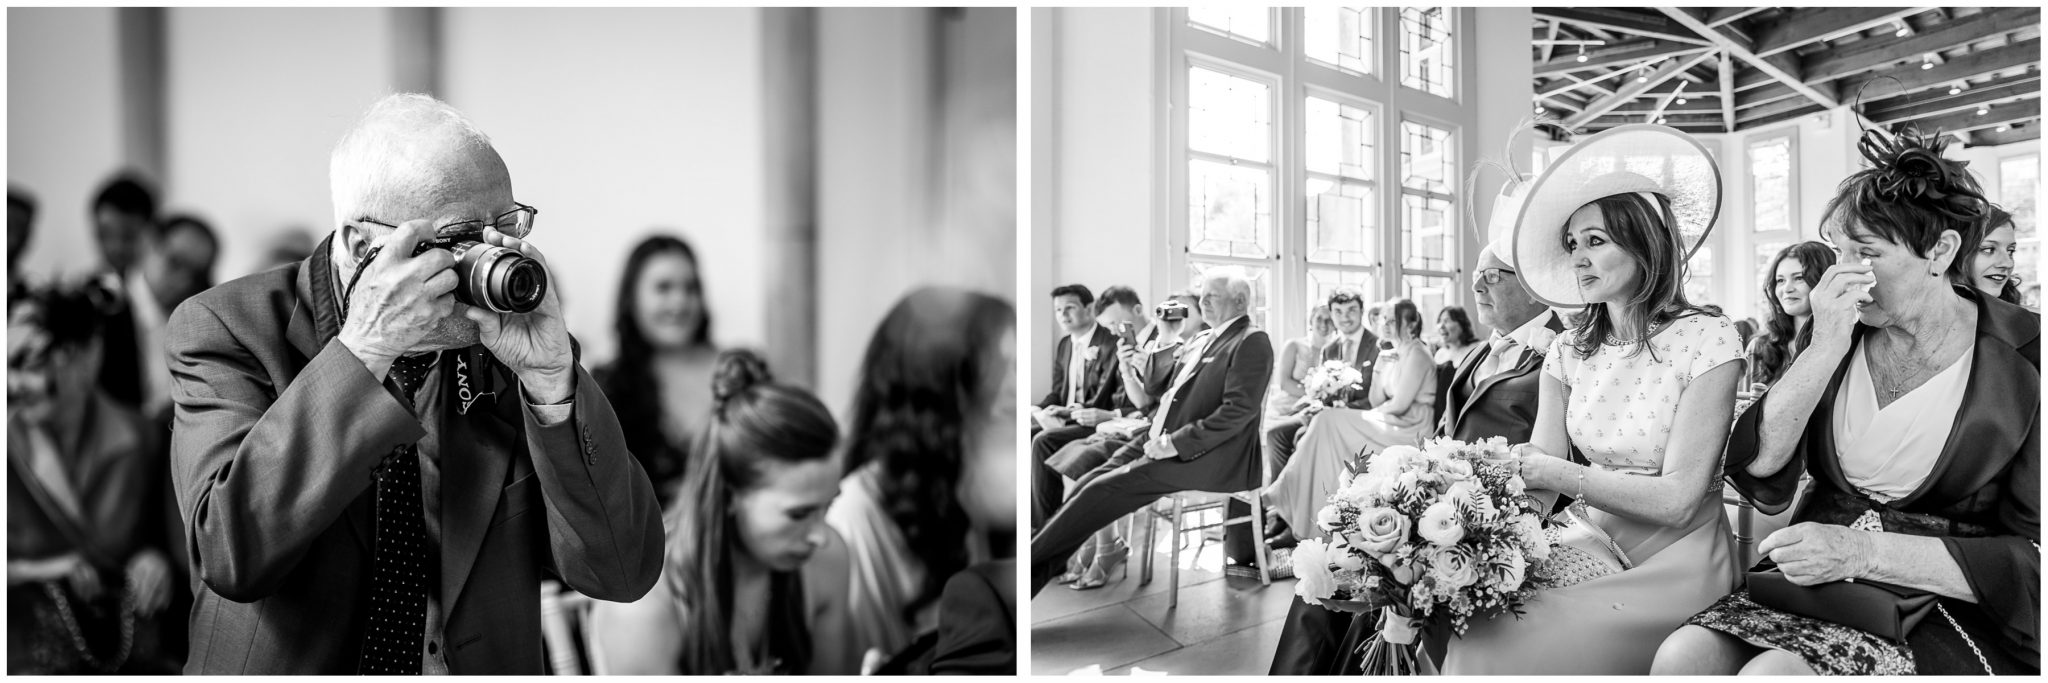 Candid black and white photographs of guests documentary Hampshire wedding photography